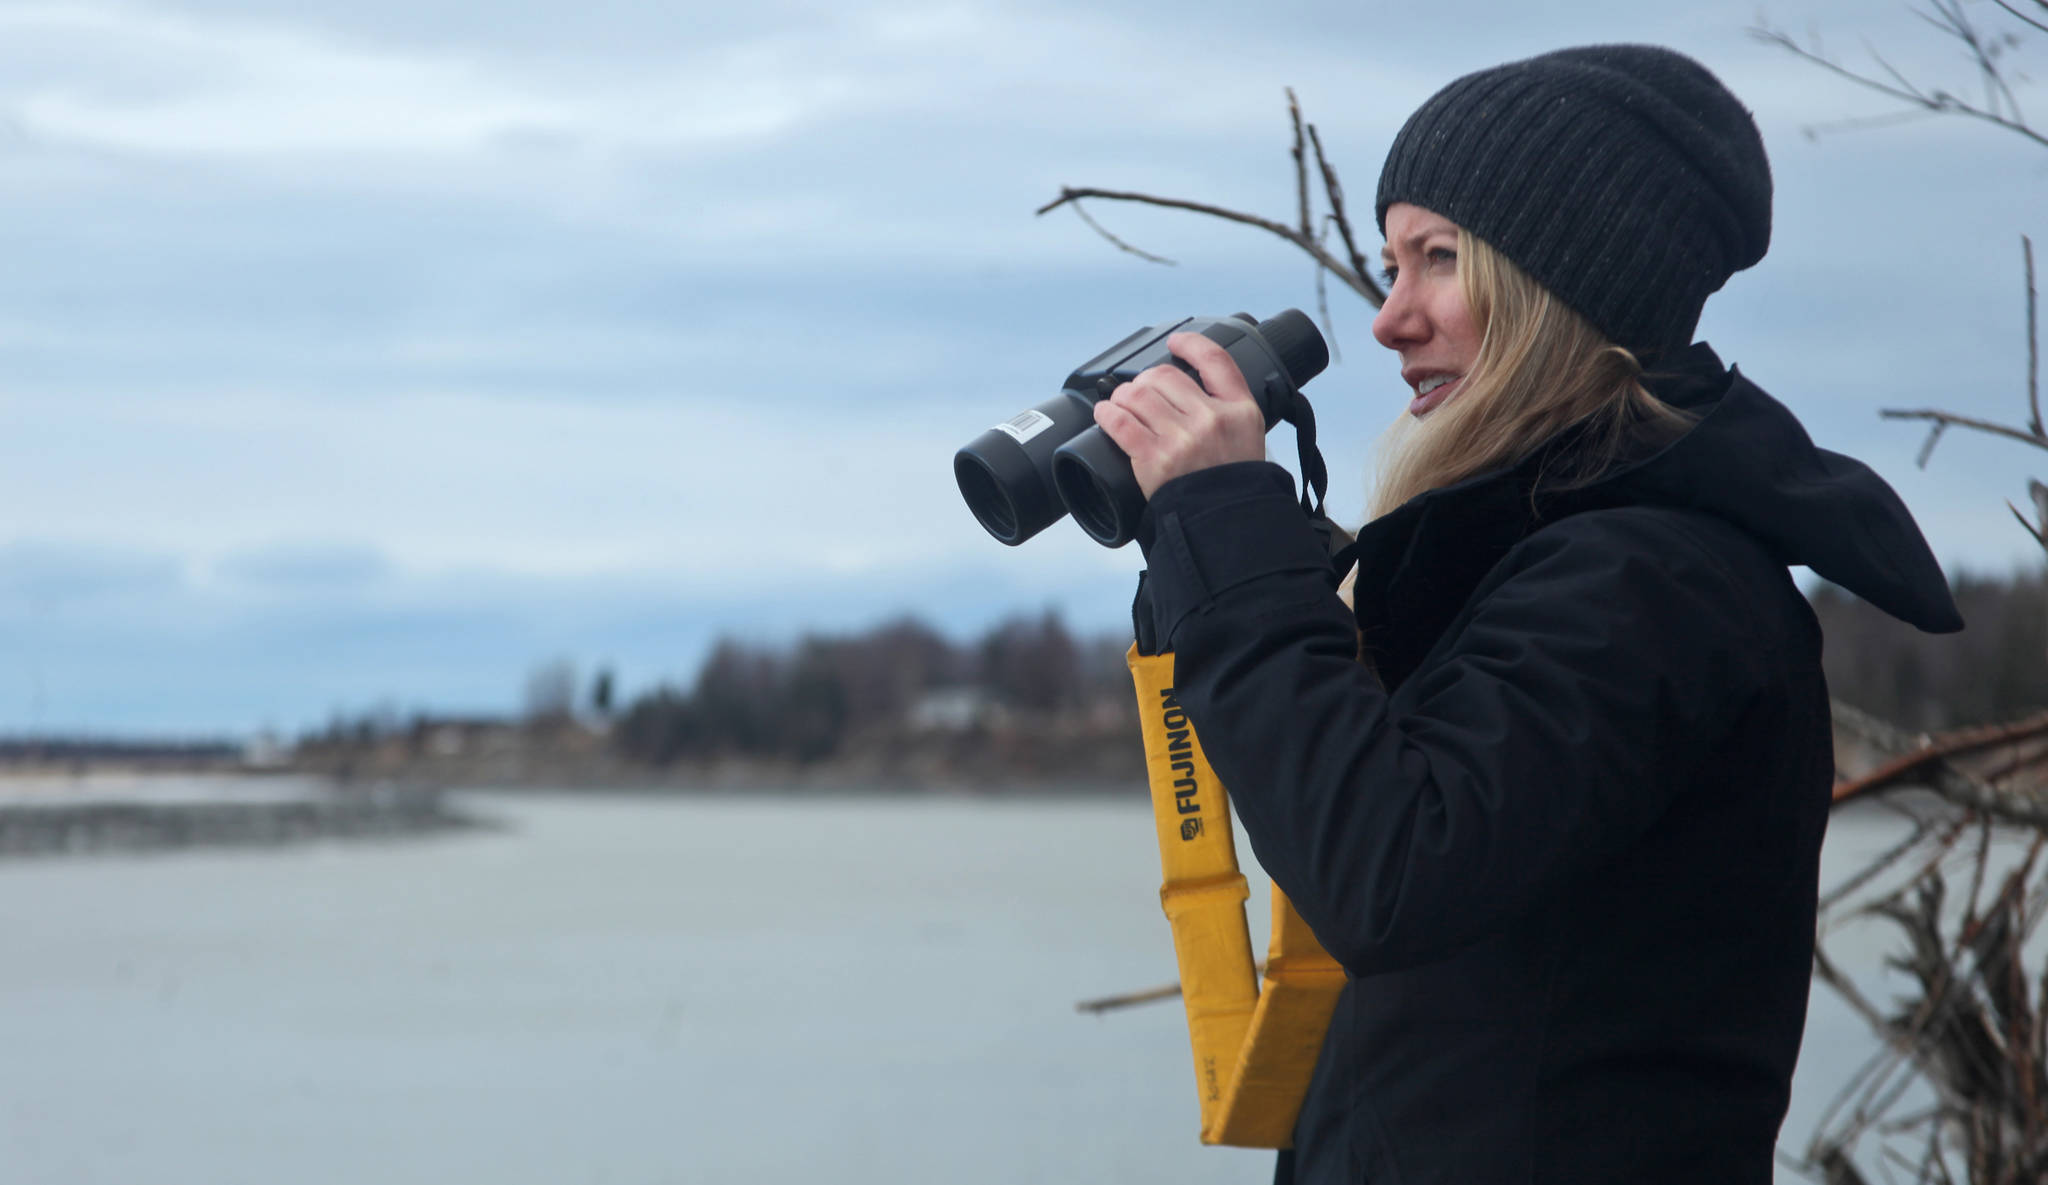 Researcher Kim Ovitz observes a group of Cook Inlet beluga whales milling in a bend of the Kenai River by Cunningham Park on Tuesday, April 10, 2018 in Kenai, Alaska. Ovitz, a fellow in the University of Alaska Fairbanks' Sea Grant program, will be counting and recording beluga activity from public locations along the Kenai River until April 31, and is also seeking to talk with local residents about their own observations of marine mammals in the Kenai. (Ben Boettger/Peninsula Clarion) 